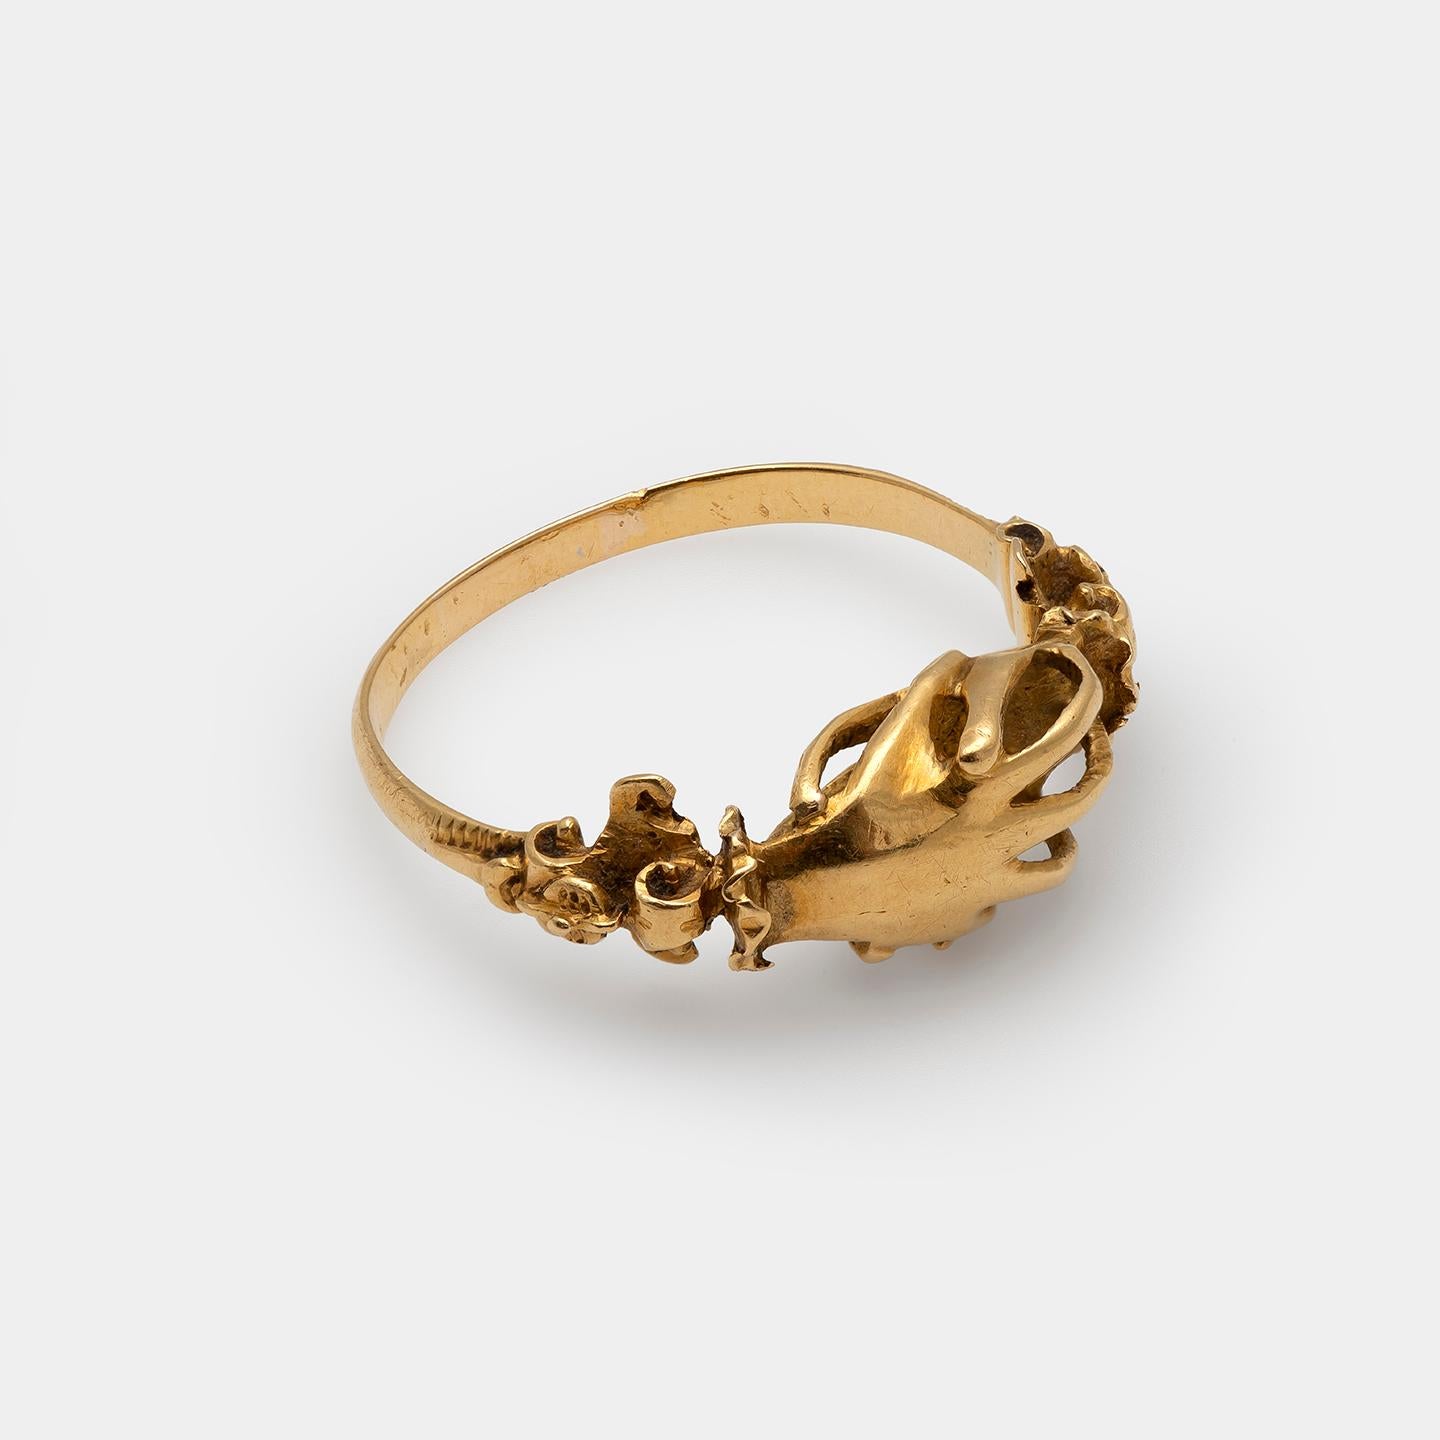 Fede ring
Western Europe, 16th - 17th century
Gold
Weight 3.8 gr; Circumference 61.64 mm; US size 9 3/4; UK Size T ¼

A delightful, sculpturesque Fede ring conveying love and loyalty

Plain gold hoop with capital-like shoulders decorated with